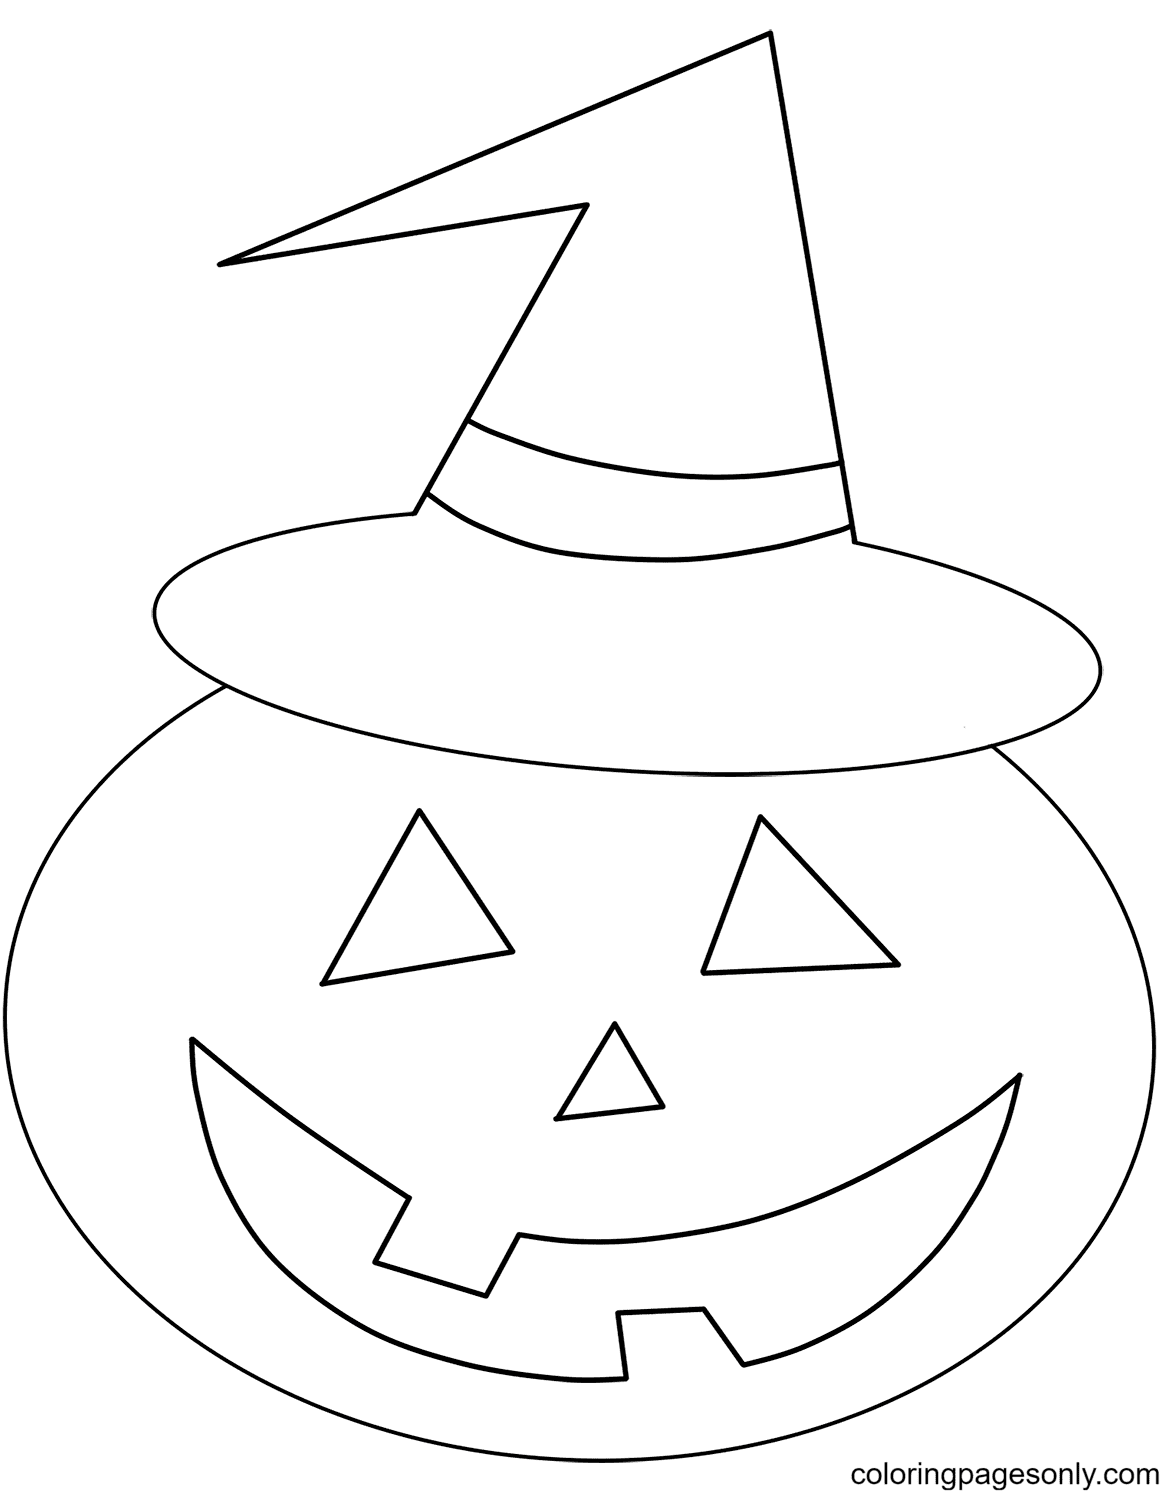 Smiling Pumpkin Coloring Page